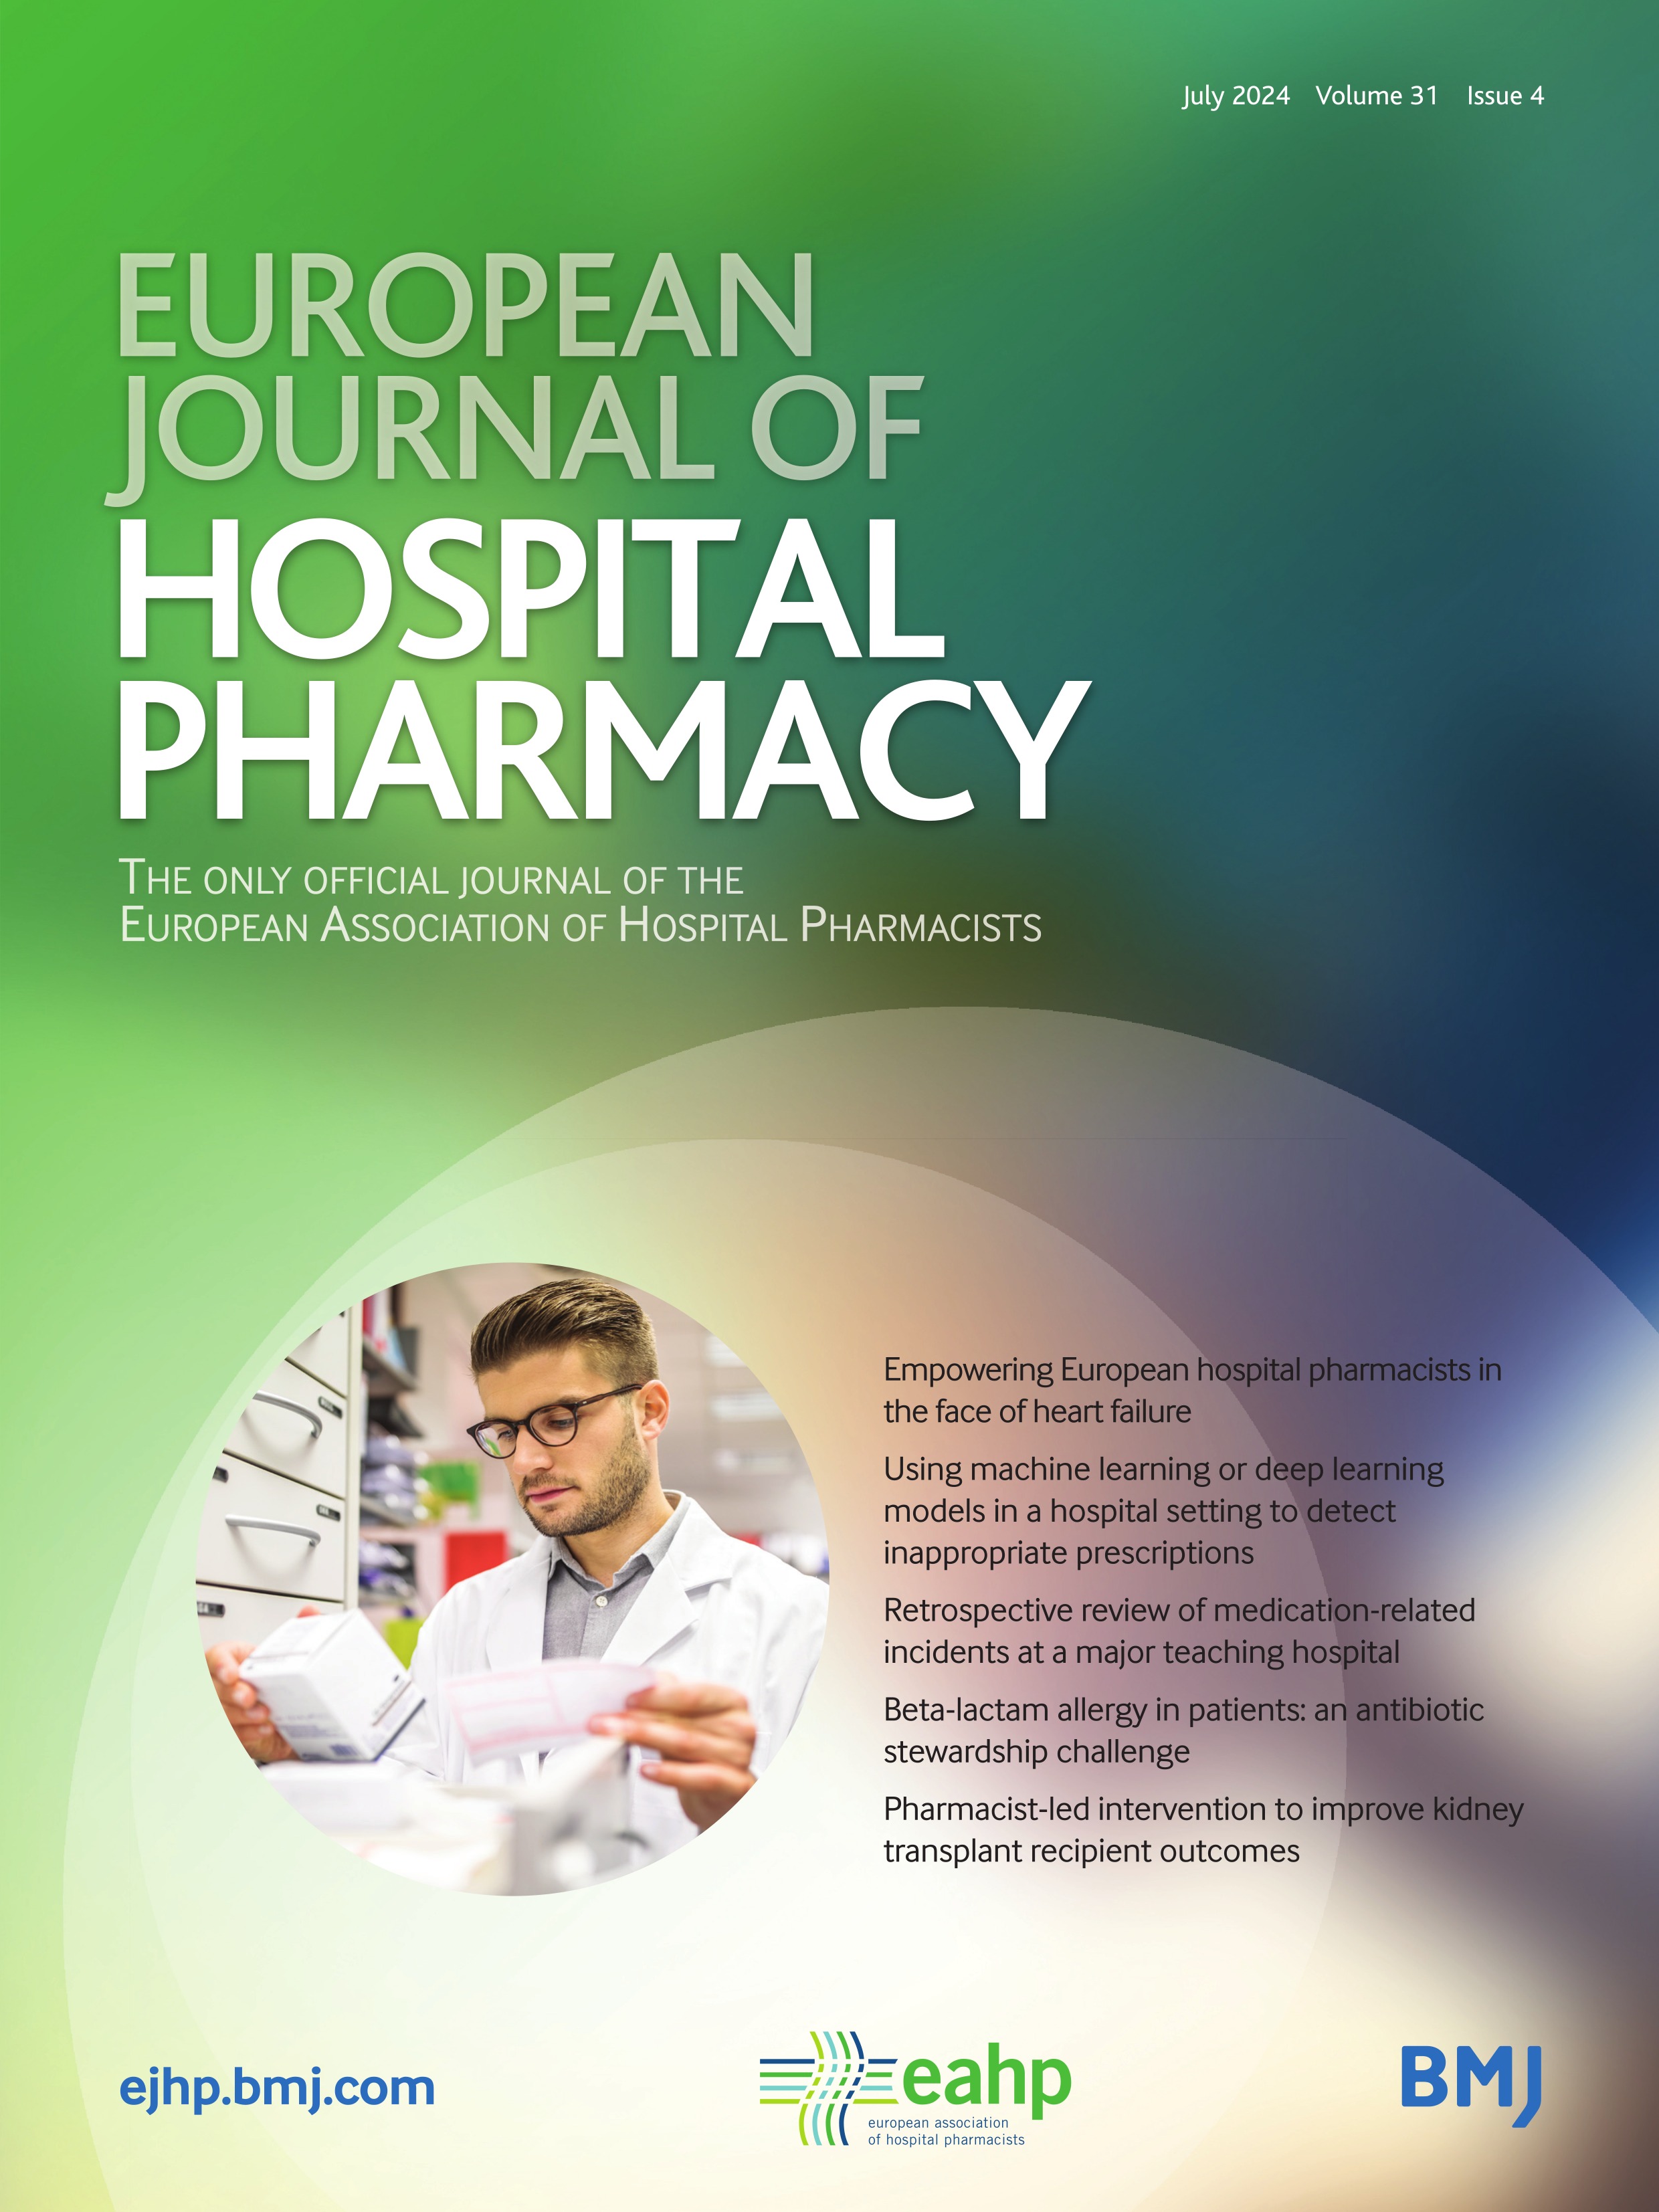 Analysis of production time and capacity for manual and robotic compounding scenarios for parenteral hazardous drugs